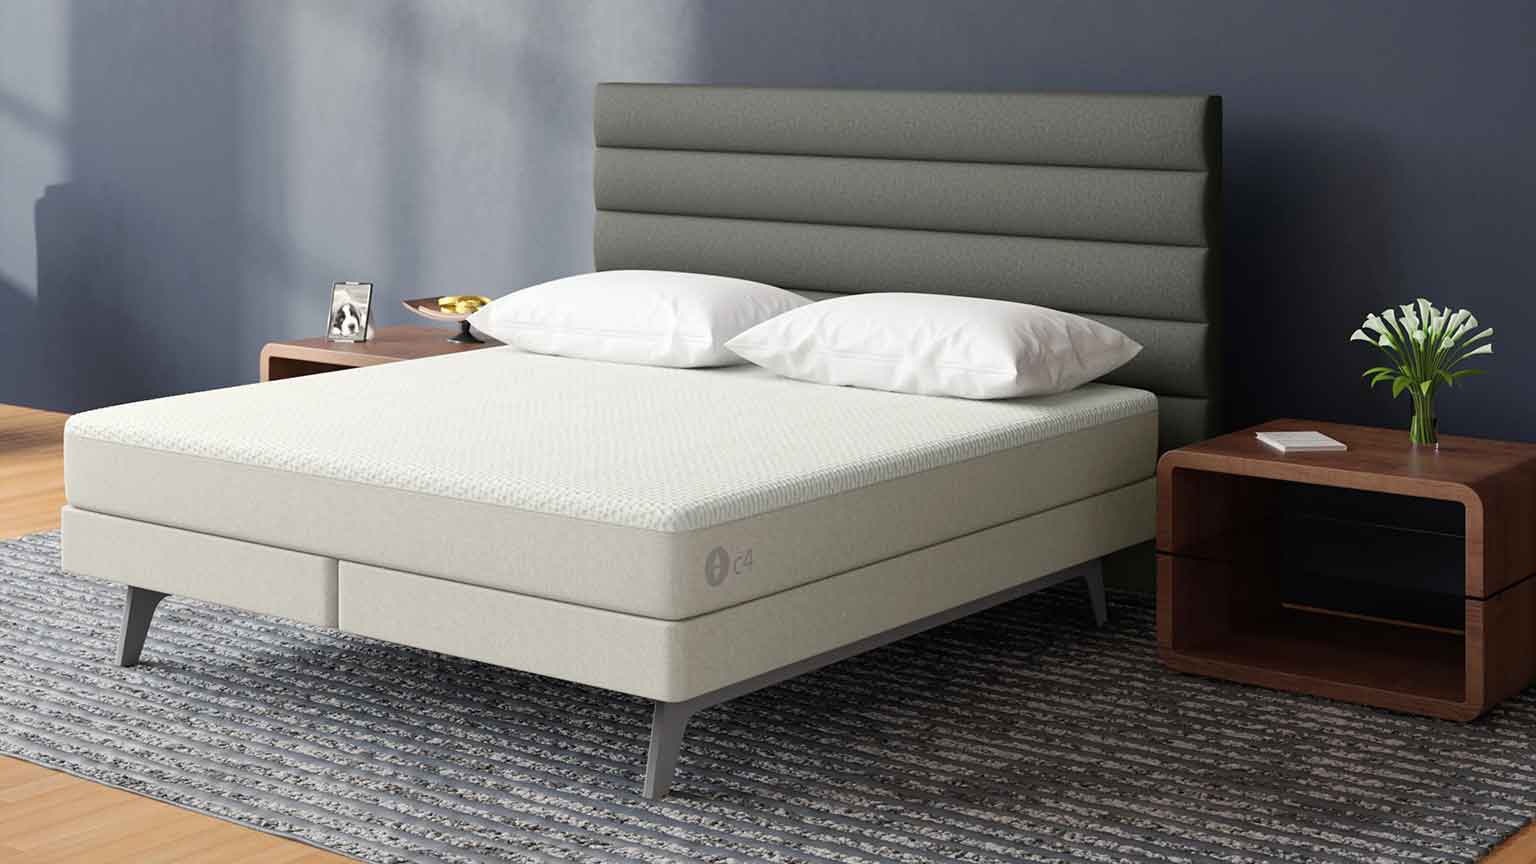 What Is A Sleep Number Mattress Made Of